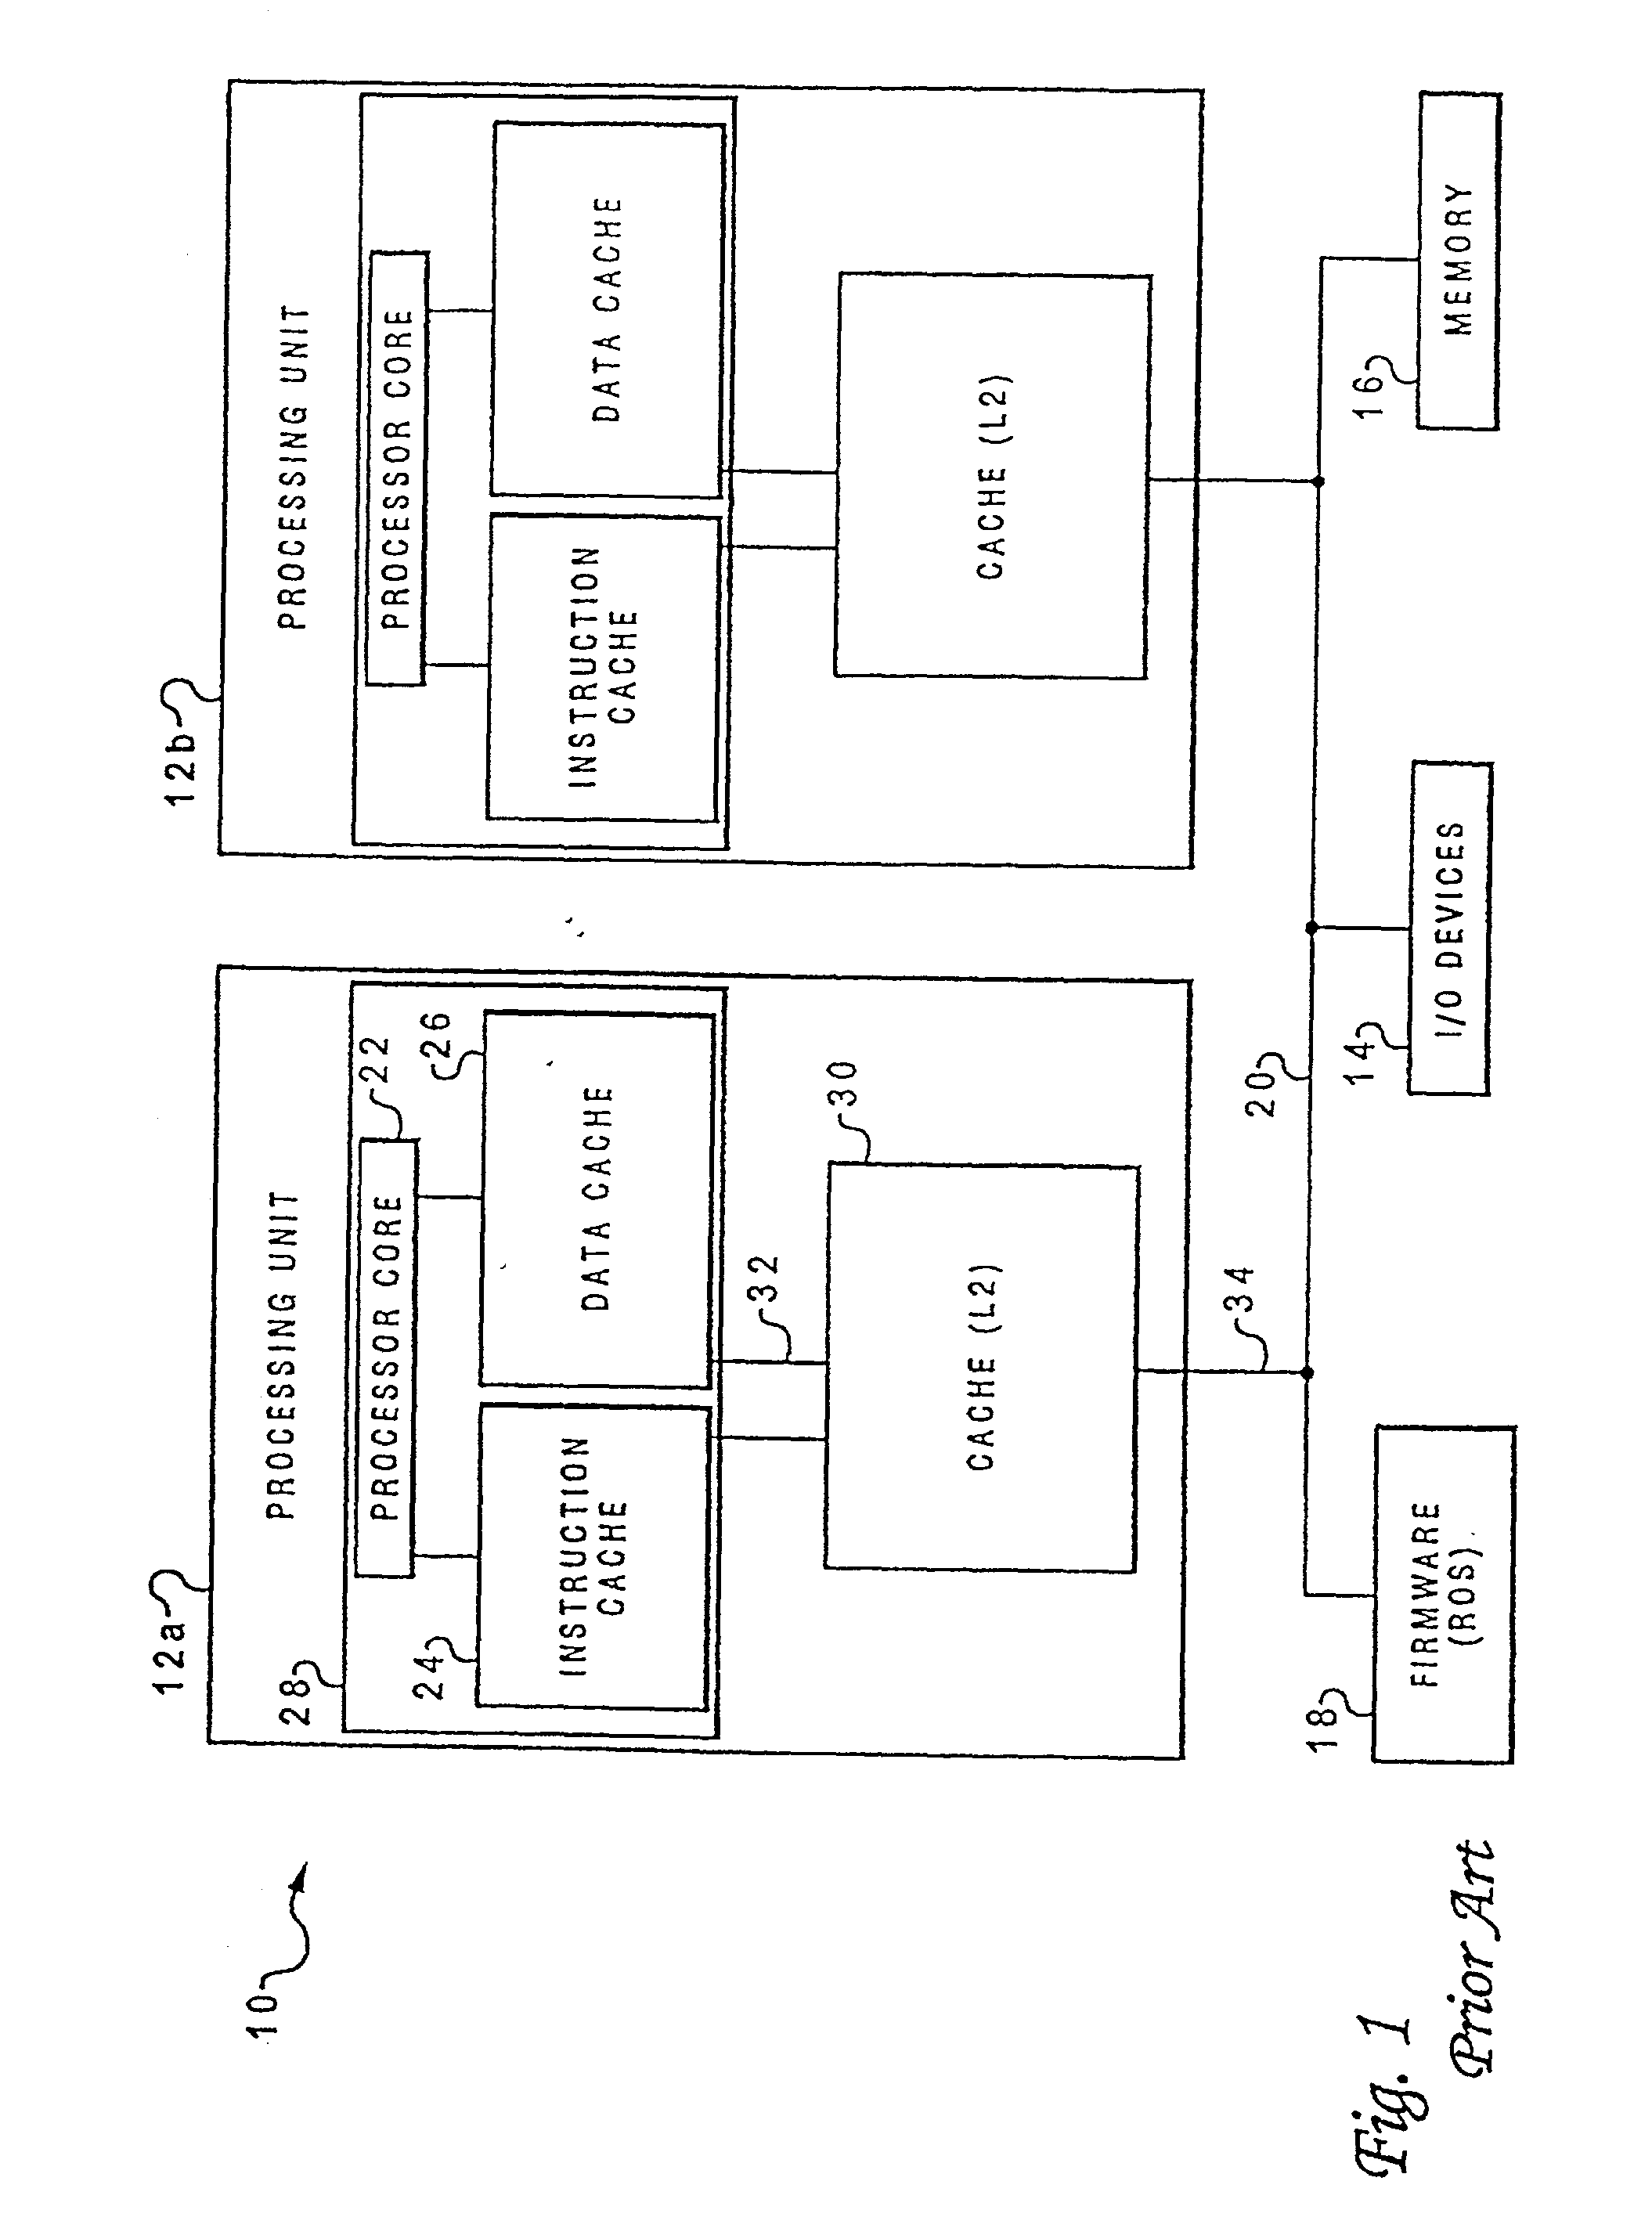 Method and system for compression of address tags in memory structures